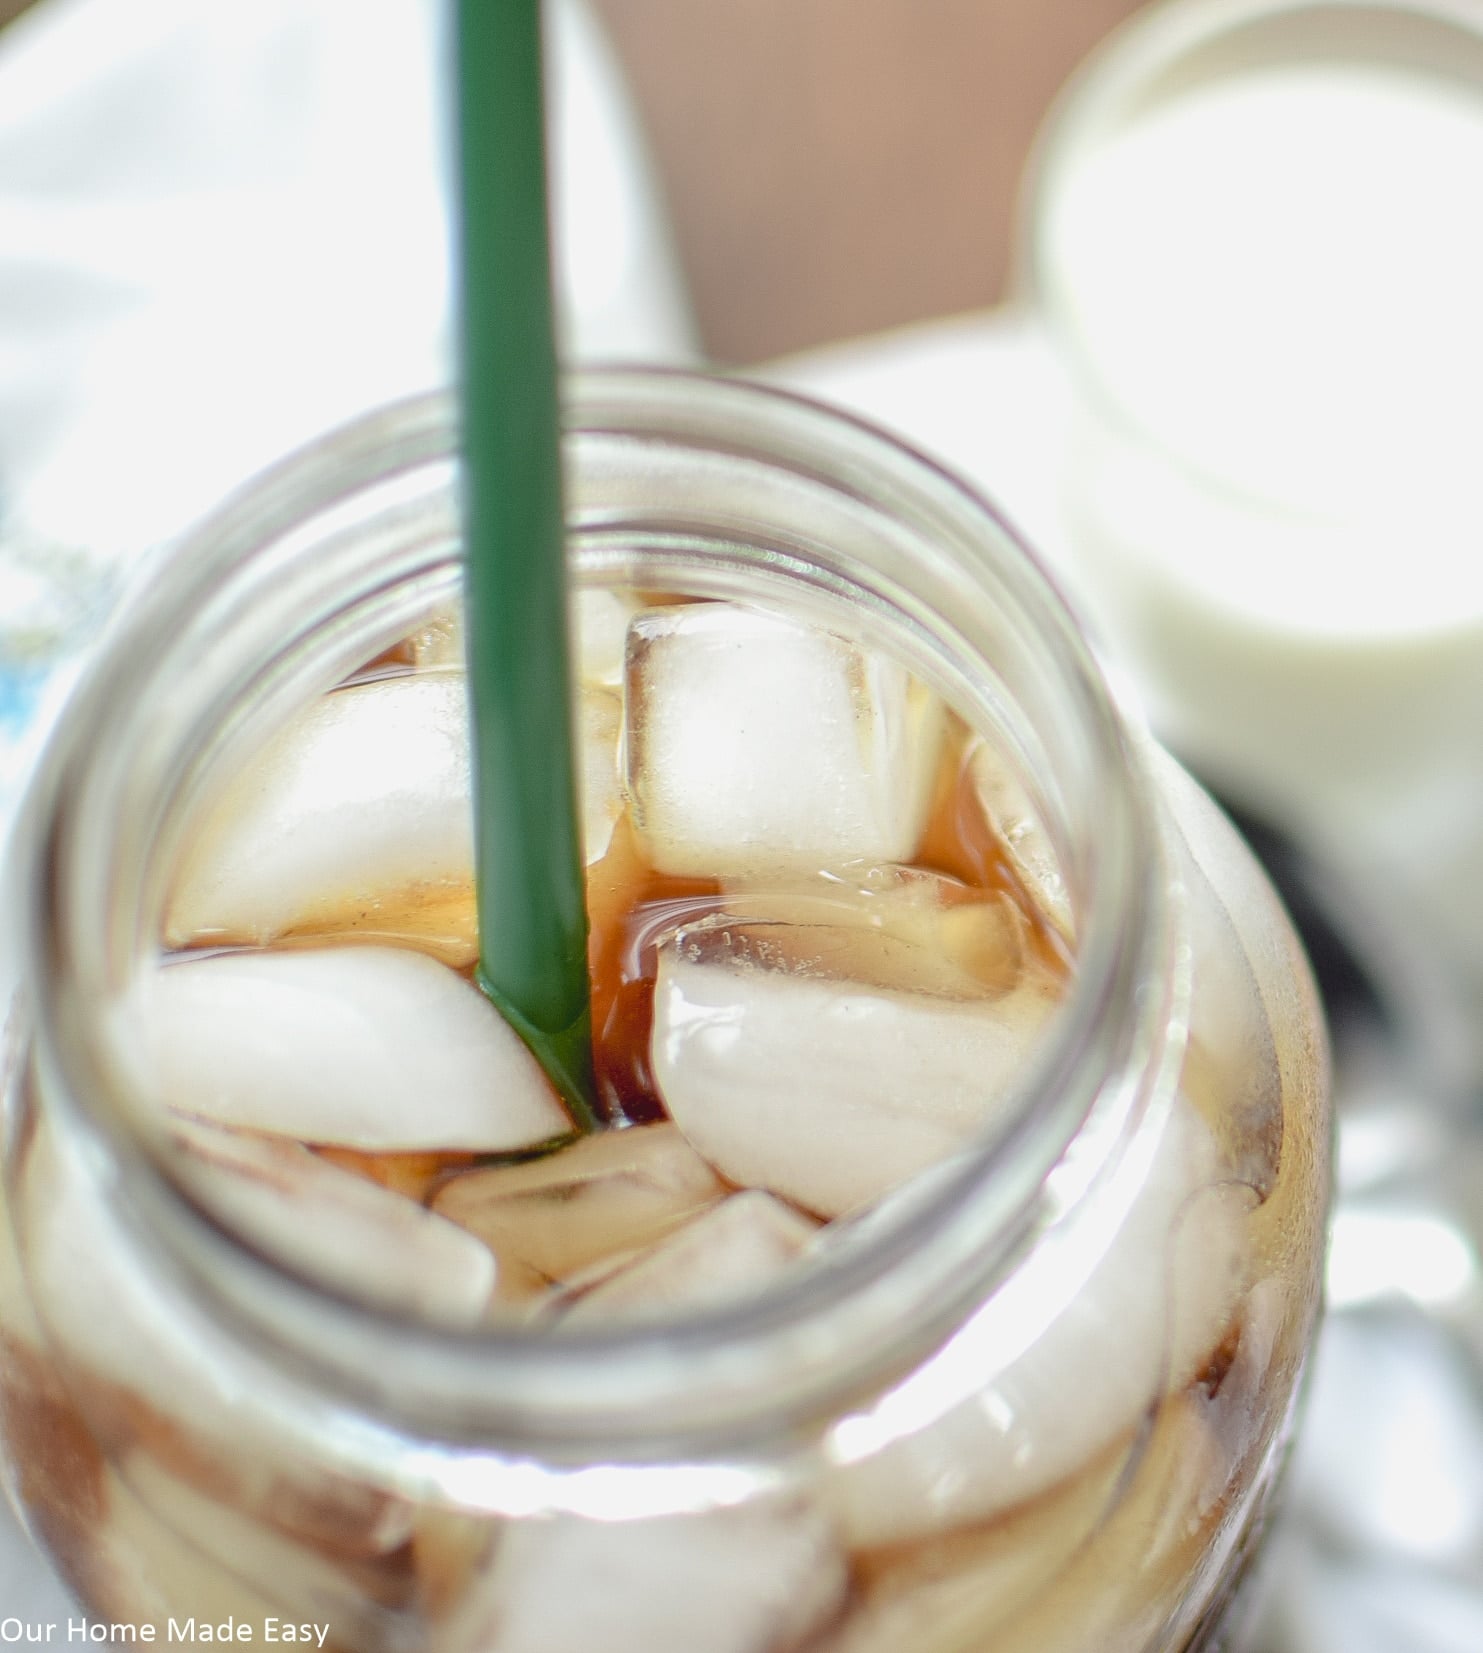 Making iced coffee at home is made extra easy with this delicious and simple cold brew coffee recipe